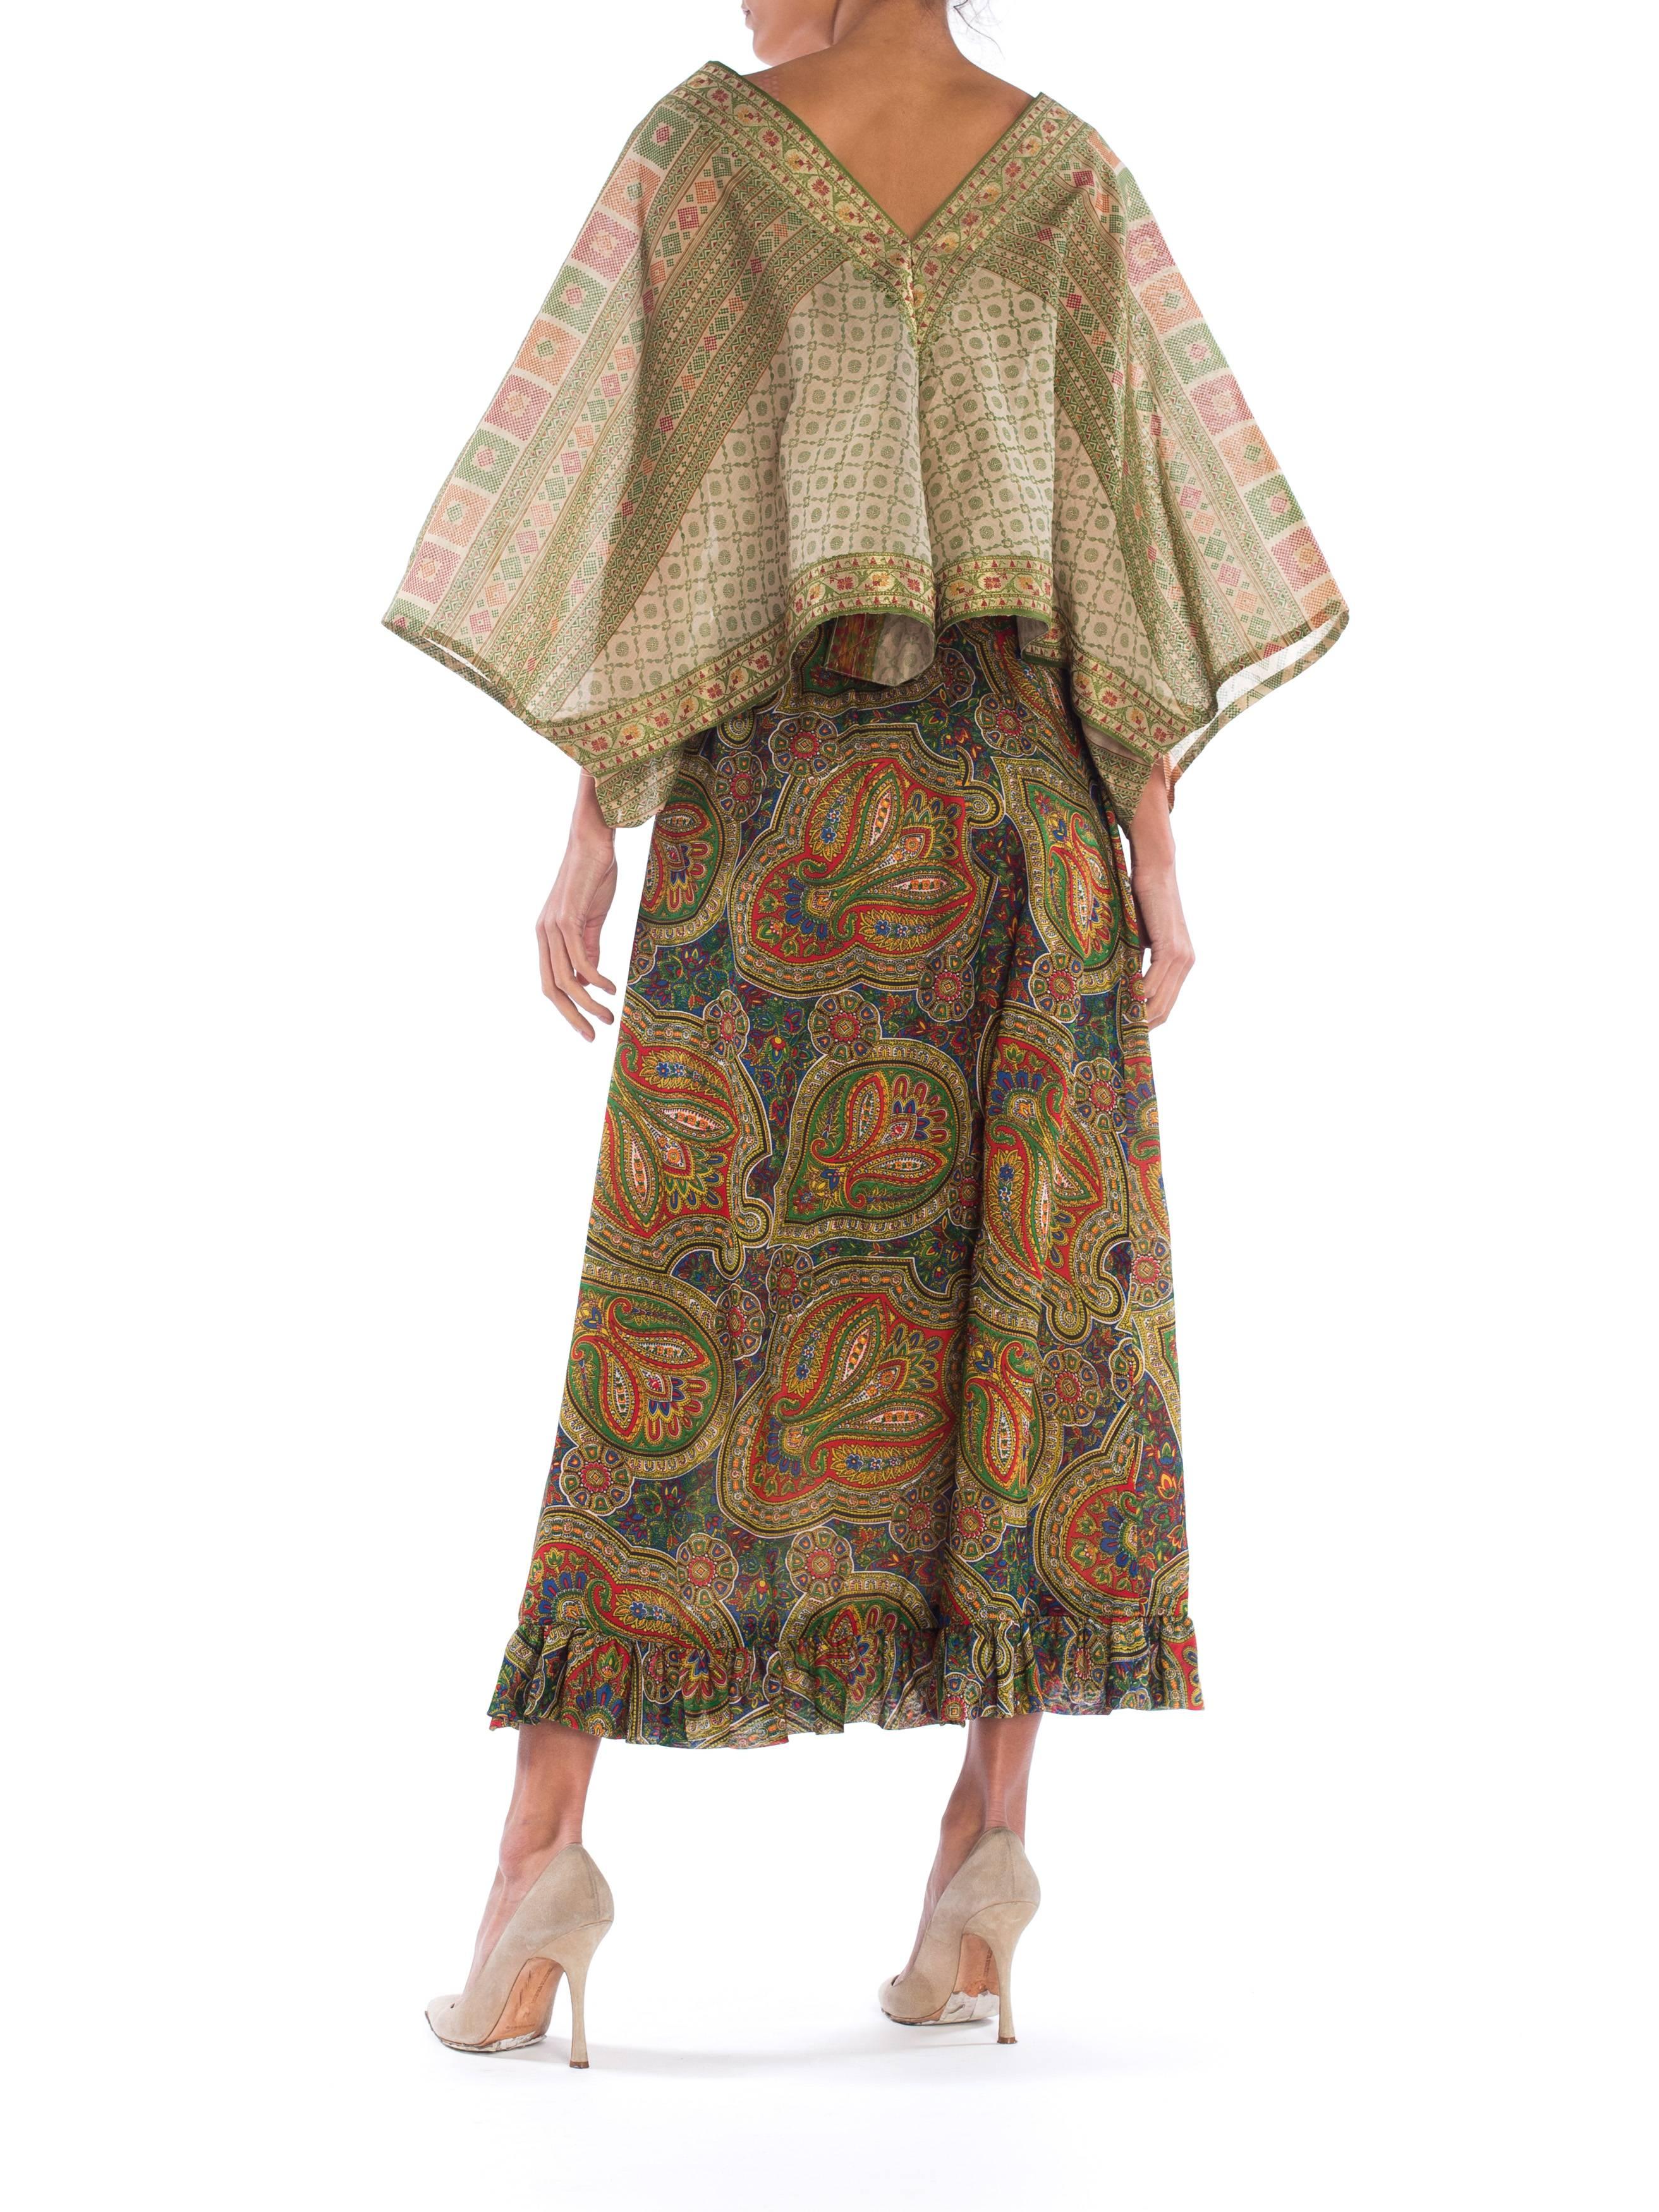 MORPHEW COLLECTION Silk & Cotton Indian Paisley Wrap Maxi Dress
MORPHEW COLLECTION is made entirely by hand in our NYC Ateliér of rare antique materials sourced from around the globe. Our sustainable vintage materials represent over a century of